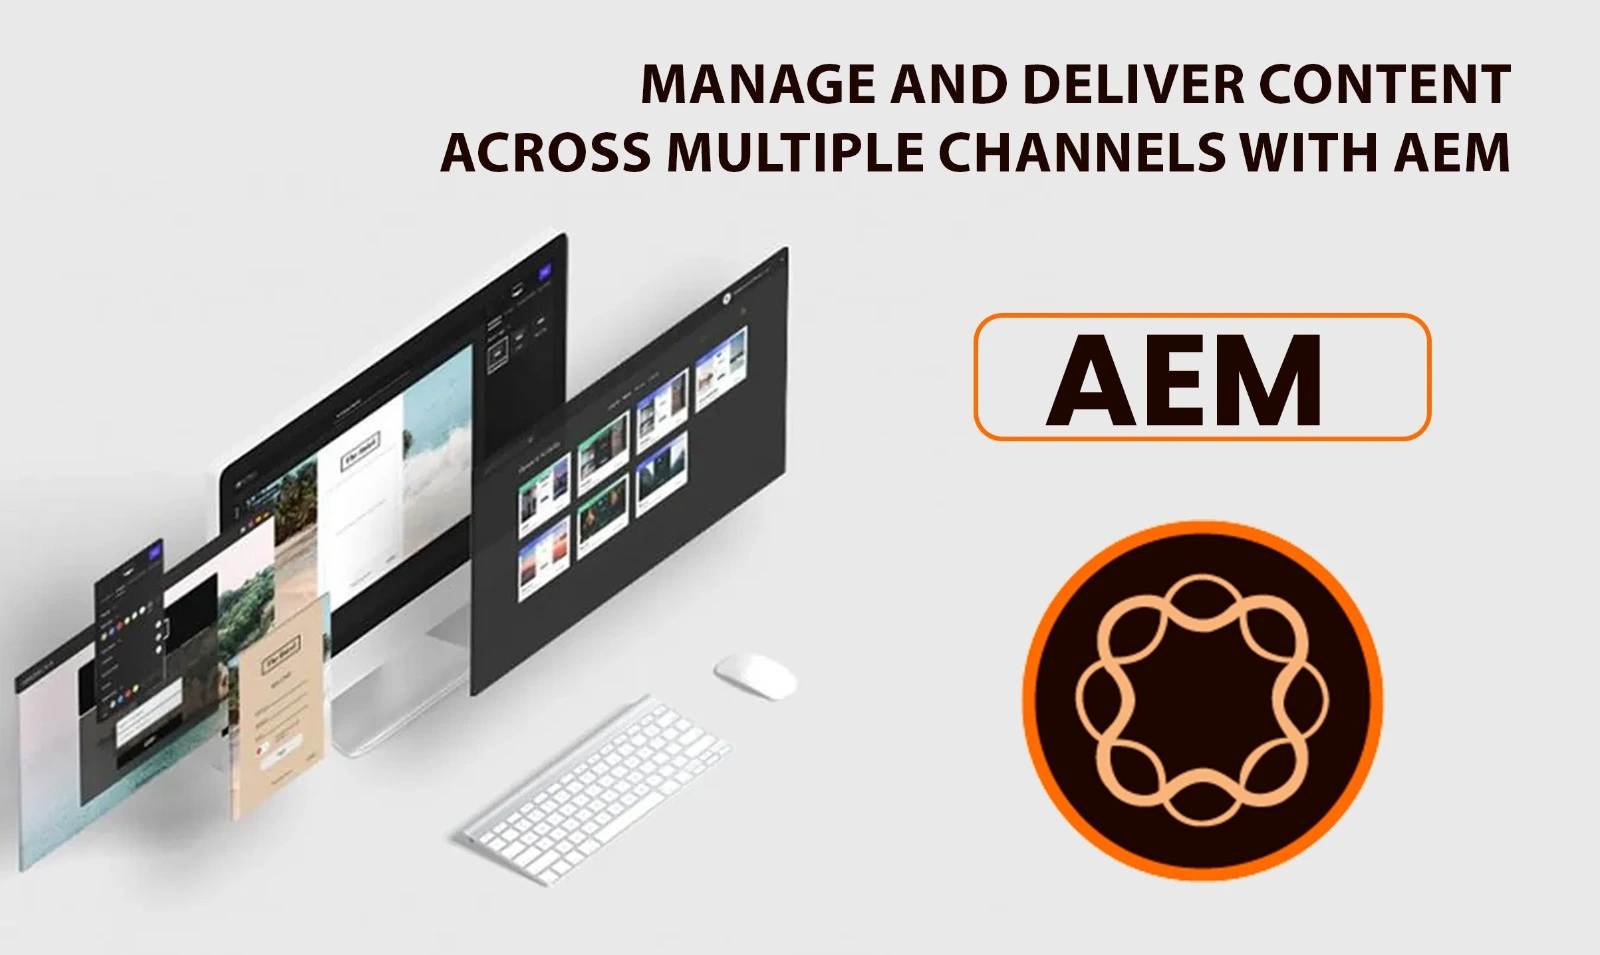 AEM to Manage and Deliver Content Across Multiple Channels